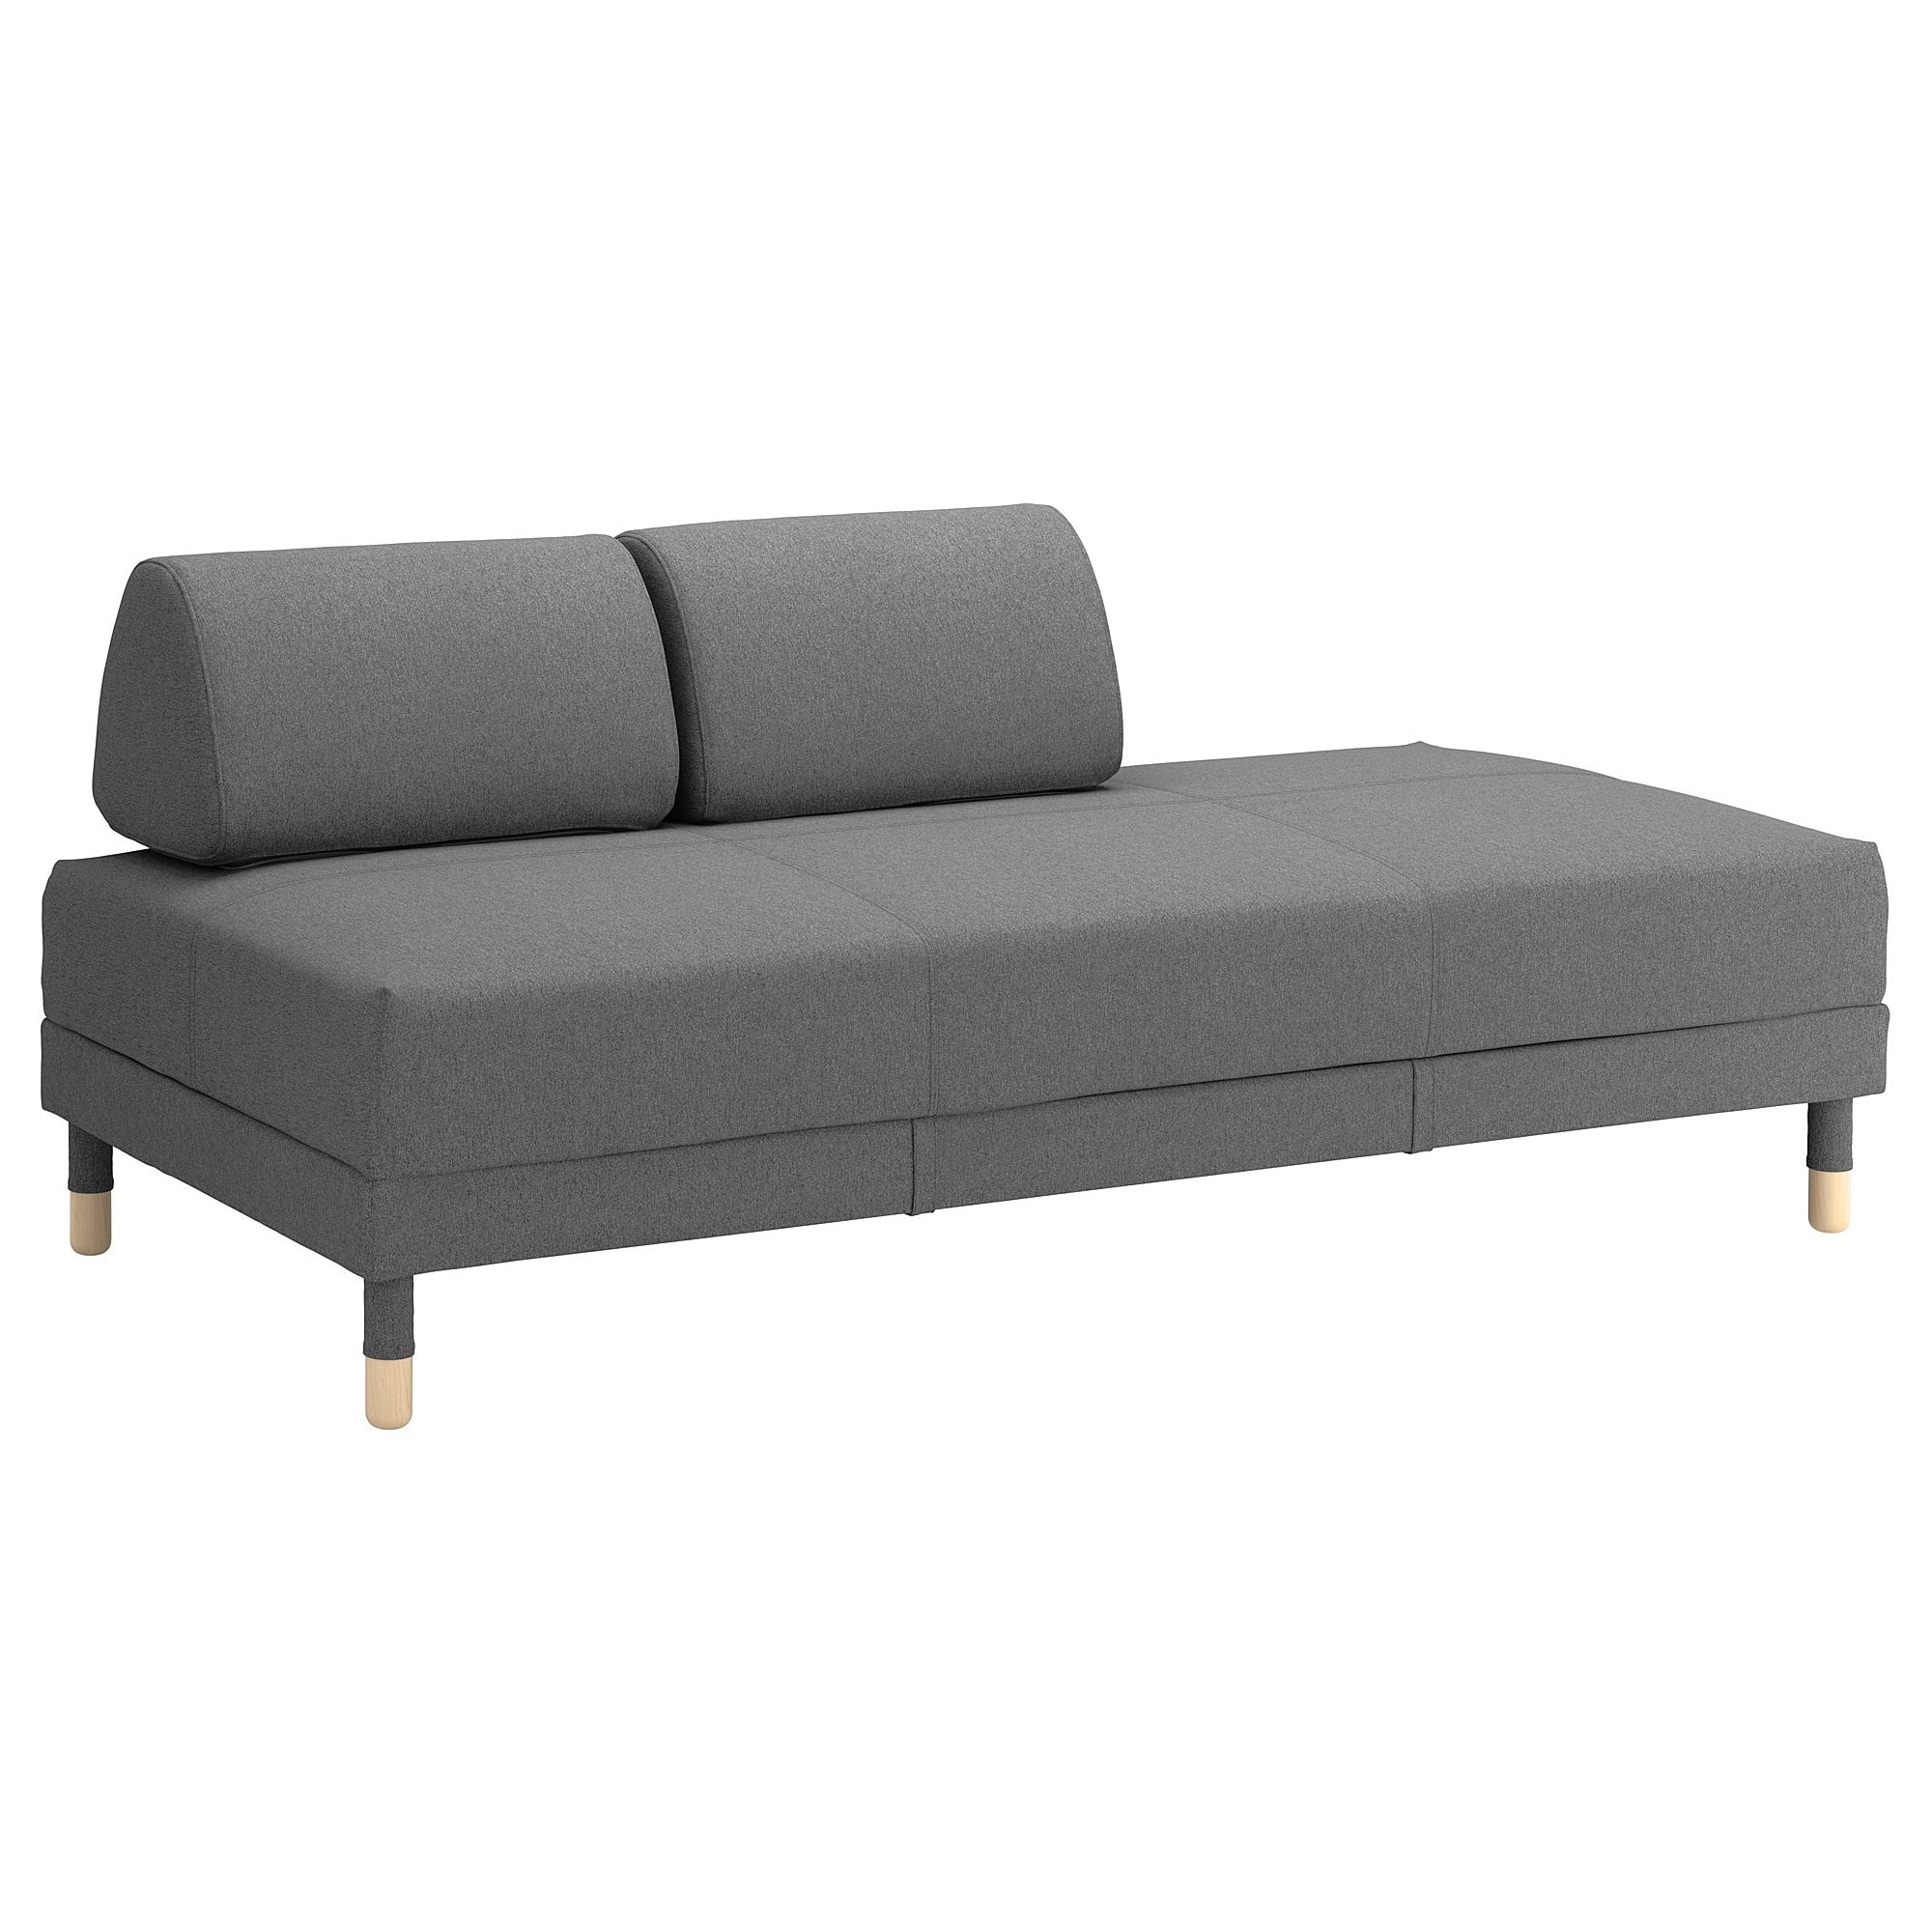 Ikea Within Fashionable Sofa Bed Chairs (View 11 of 20)